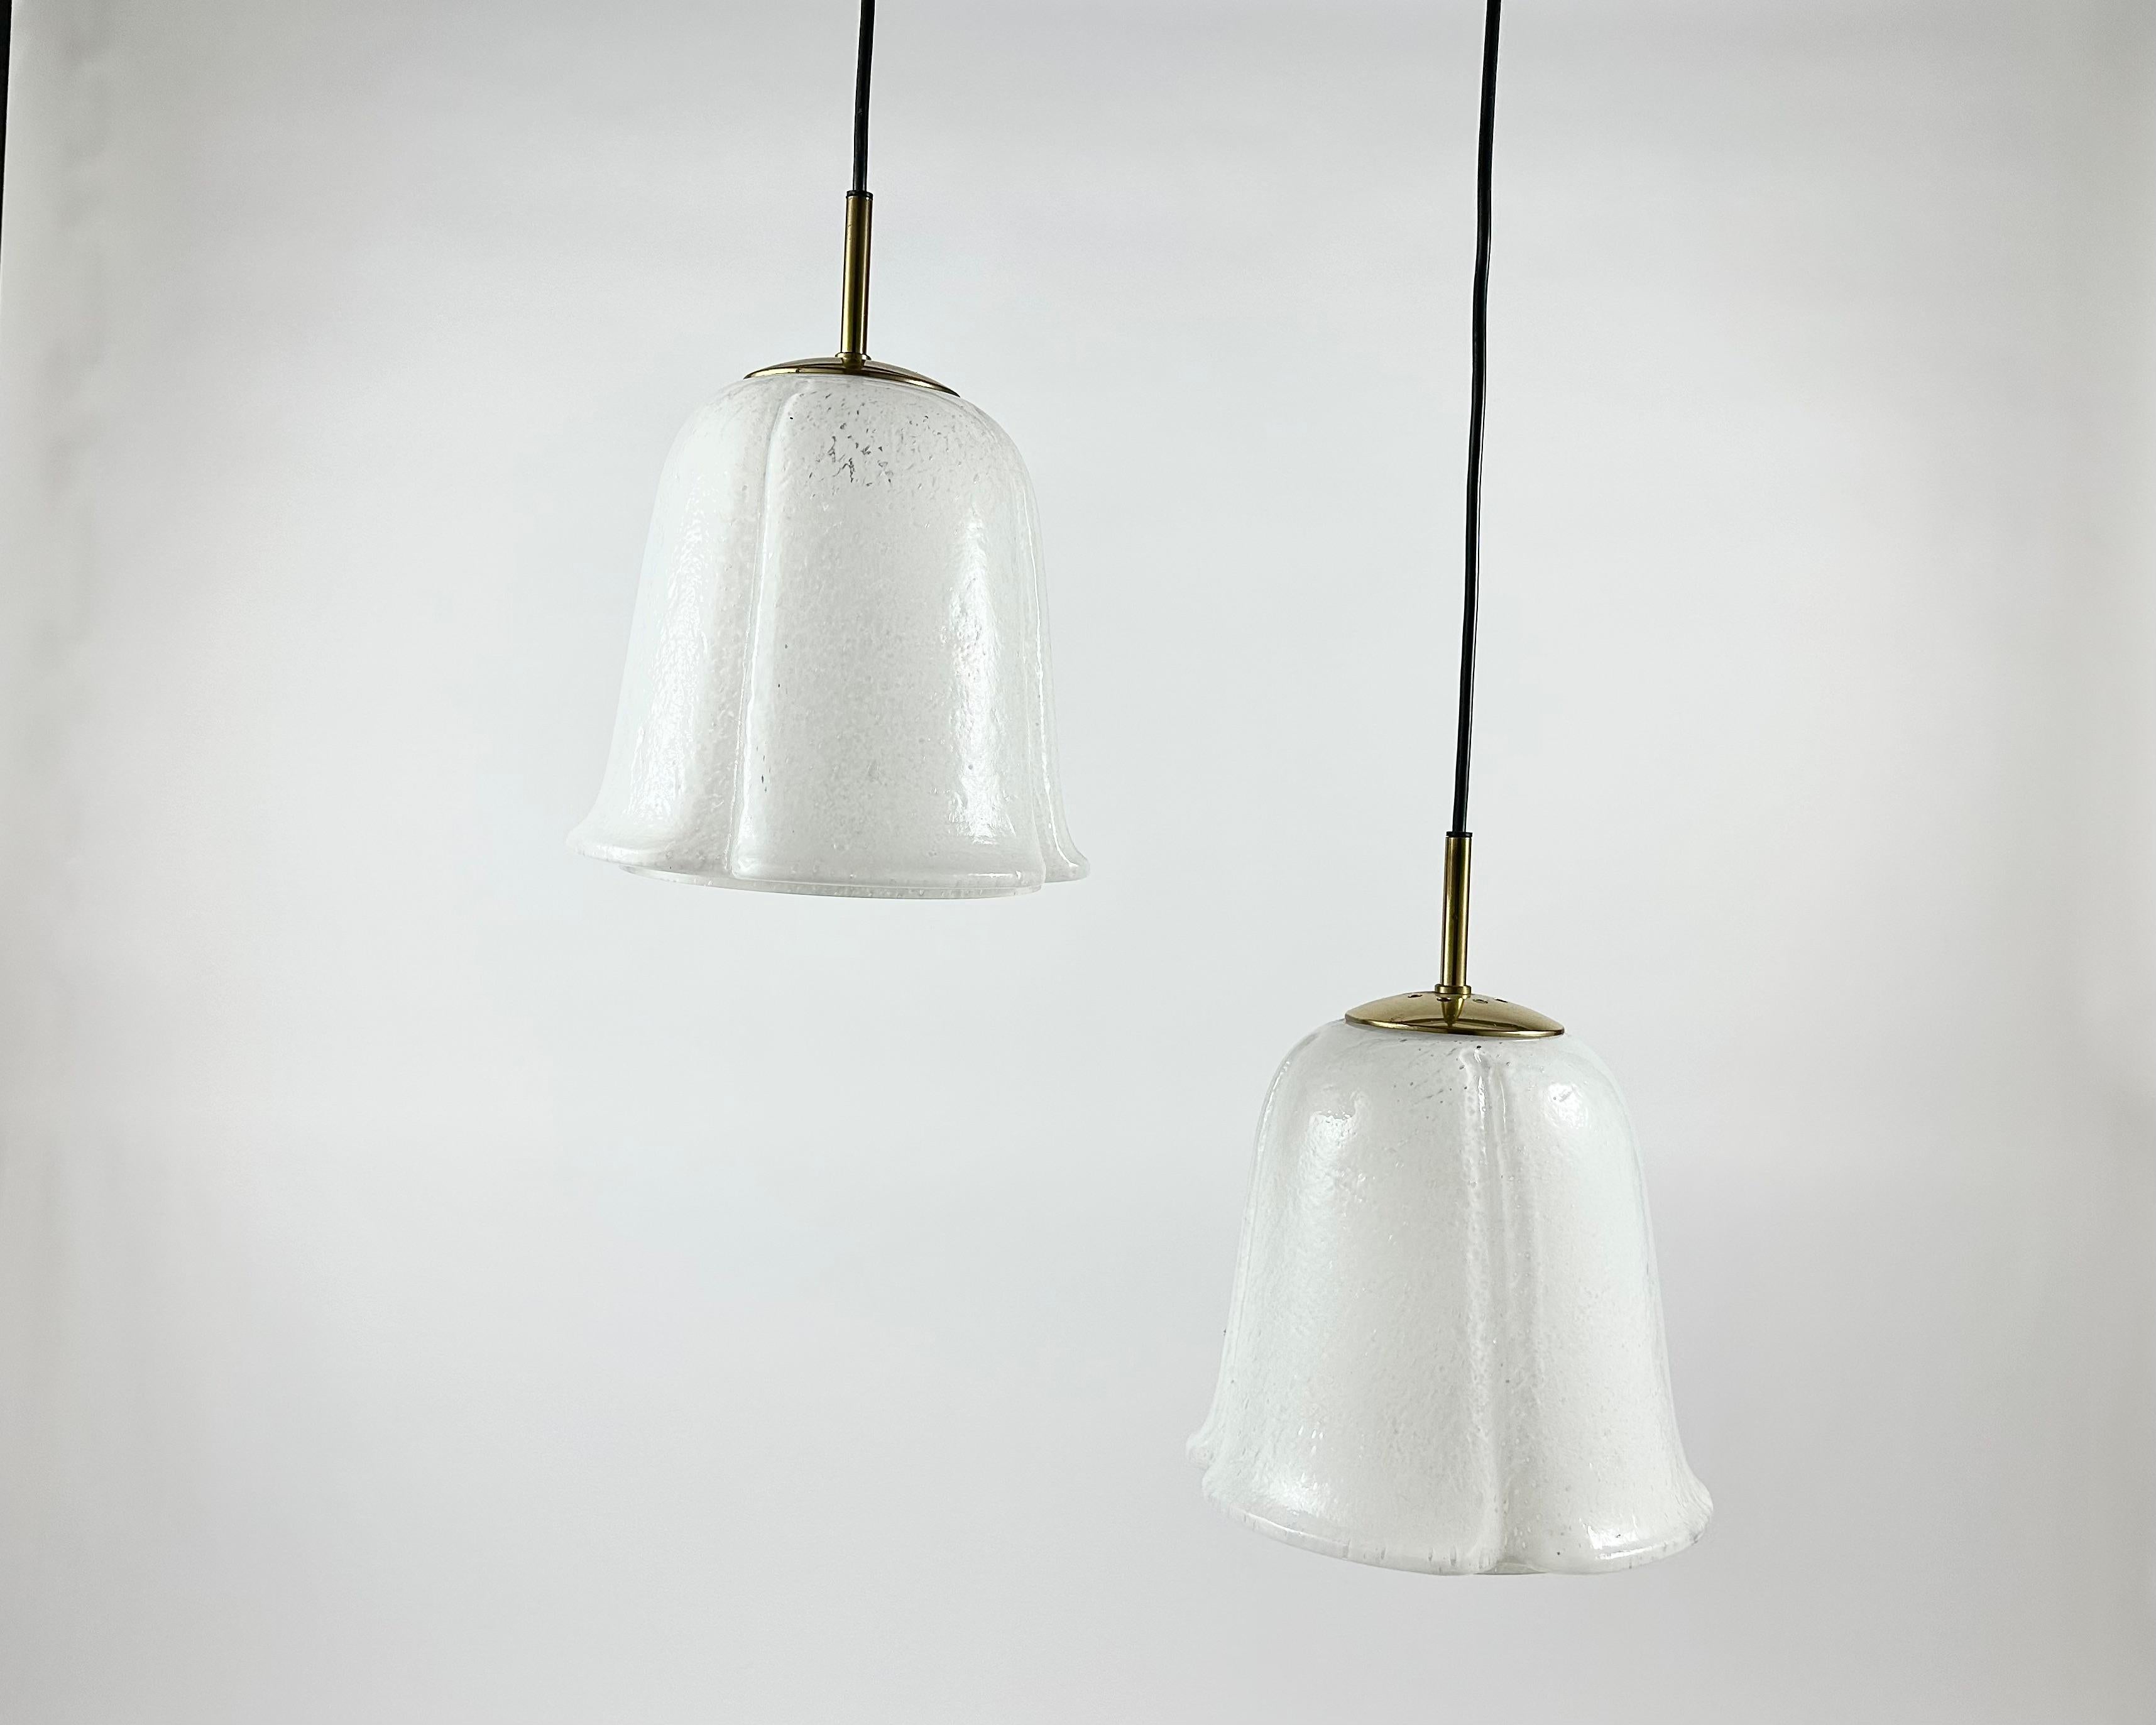 Beautiful early Italian glass pendant lights from the 1970ss. Constructed out of glass with stunning gilt brass fixtures.

Attractive glass vintage lamps that can be used as an accent in the interior and looks great on the ceiling.  

Time to invest